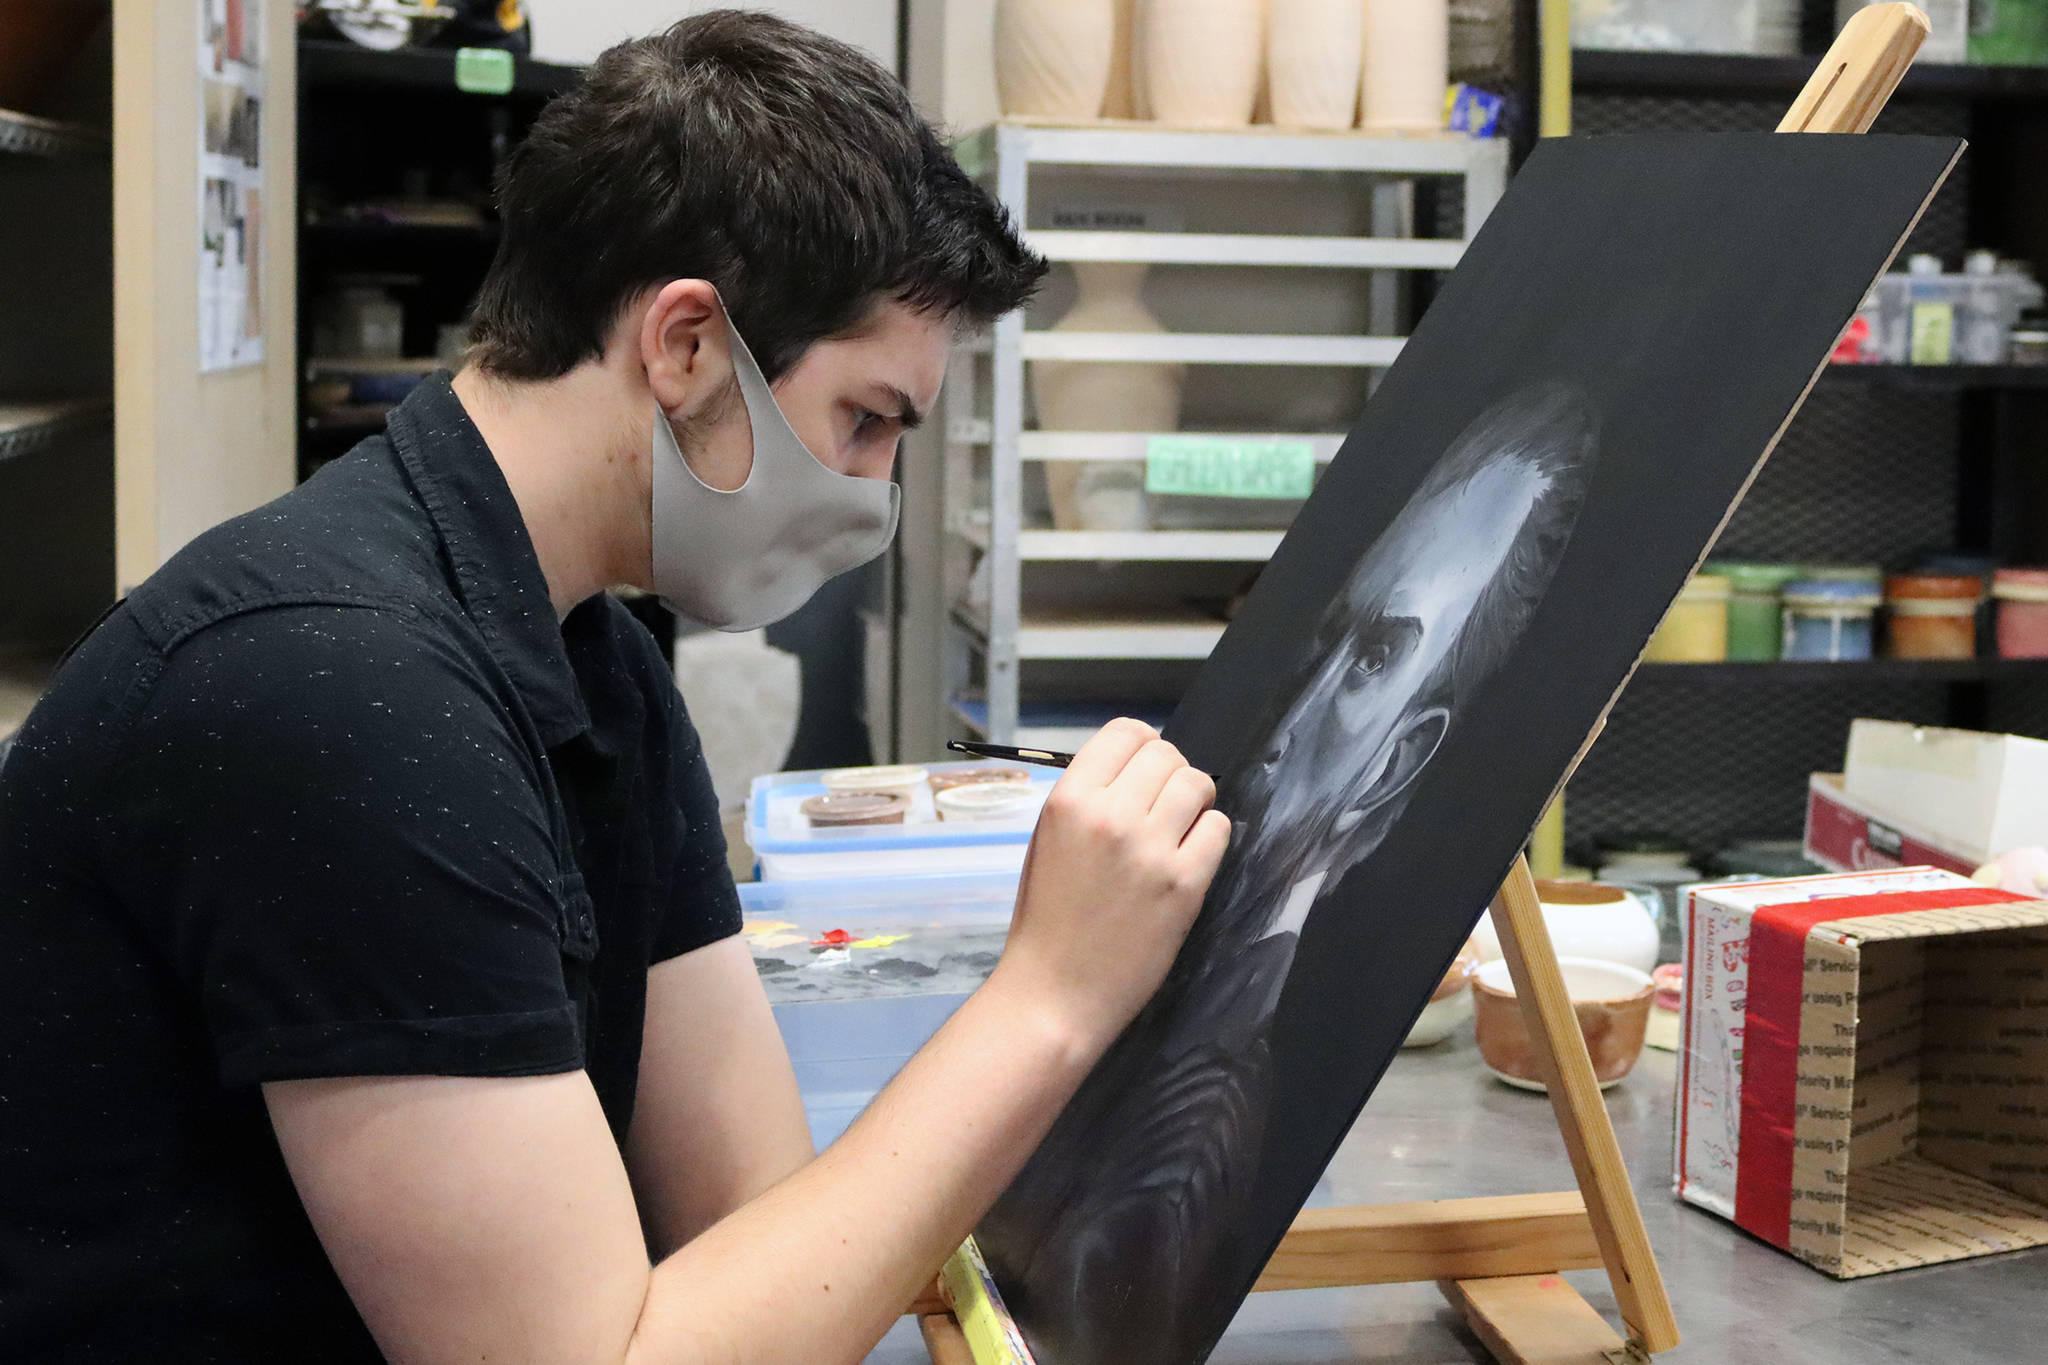 Garrett Klein, a rising senior at TMHS, works on a painting earlier this month. One of Klein’s pieces was awarded the Congressional Award in the 2021 All-State Art Competition and will hang in Washington, D.C. (Ben Hohenstatt / Juneau Empire)